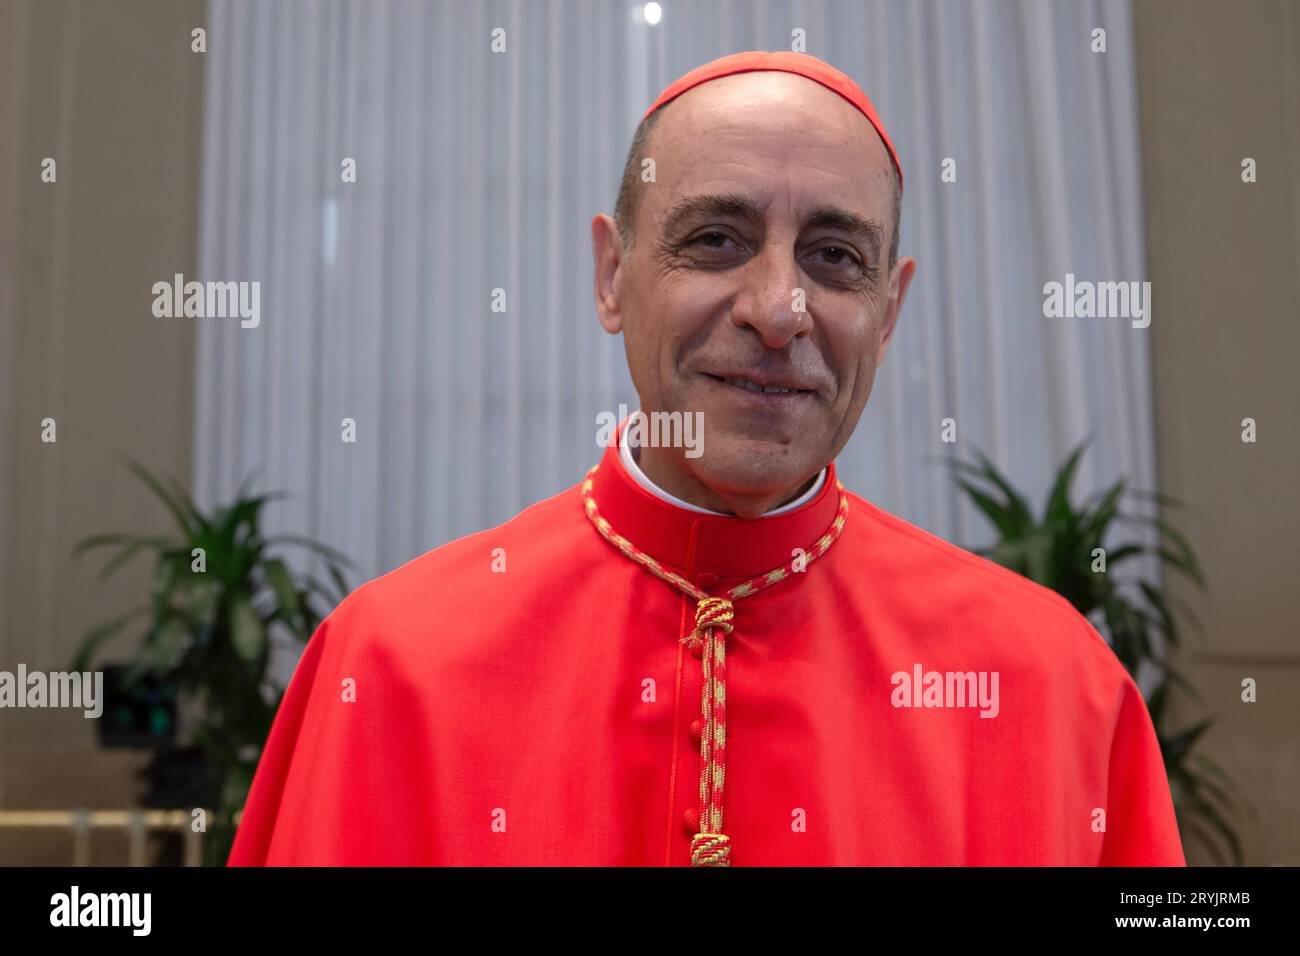 Vatican City, Vatican, 30 September 2023. Newly elected Cardinal Victor Manuel Fernandez during the courtesy visits in the Apostilic palace. Pope Francis elevates 21 new cardinals during the Ordinary Public Consistory in St. Peter's Square at the vatican. Maria Grazia Picciarella/Alamy Live News Stock Photo